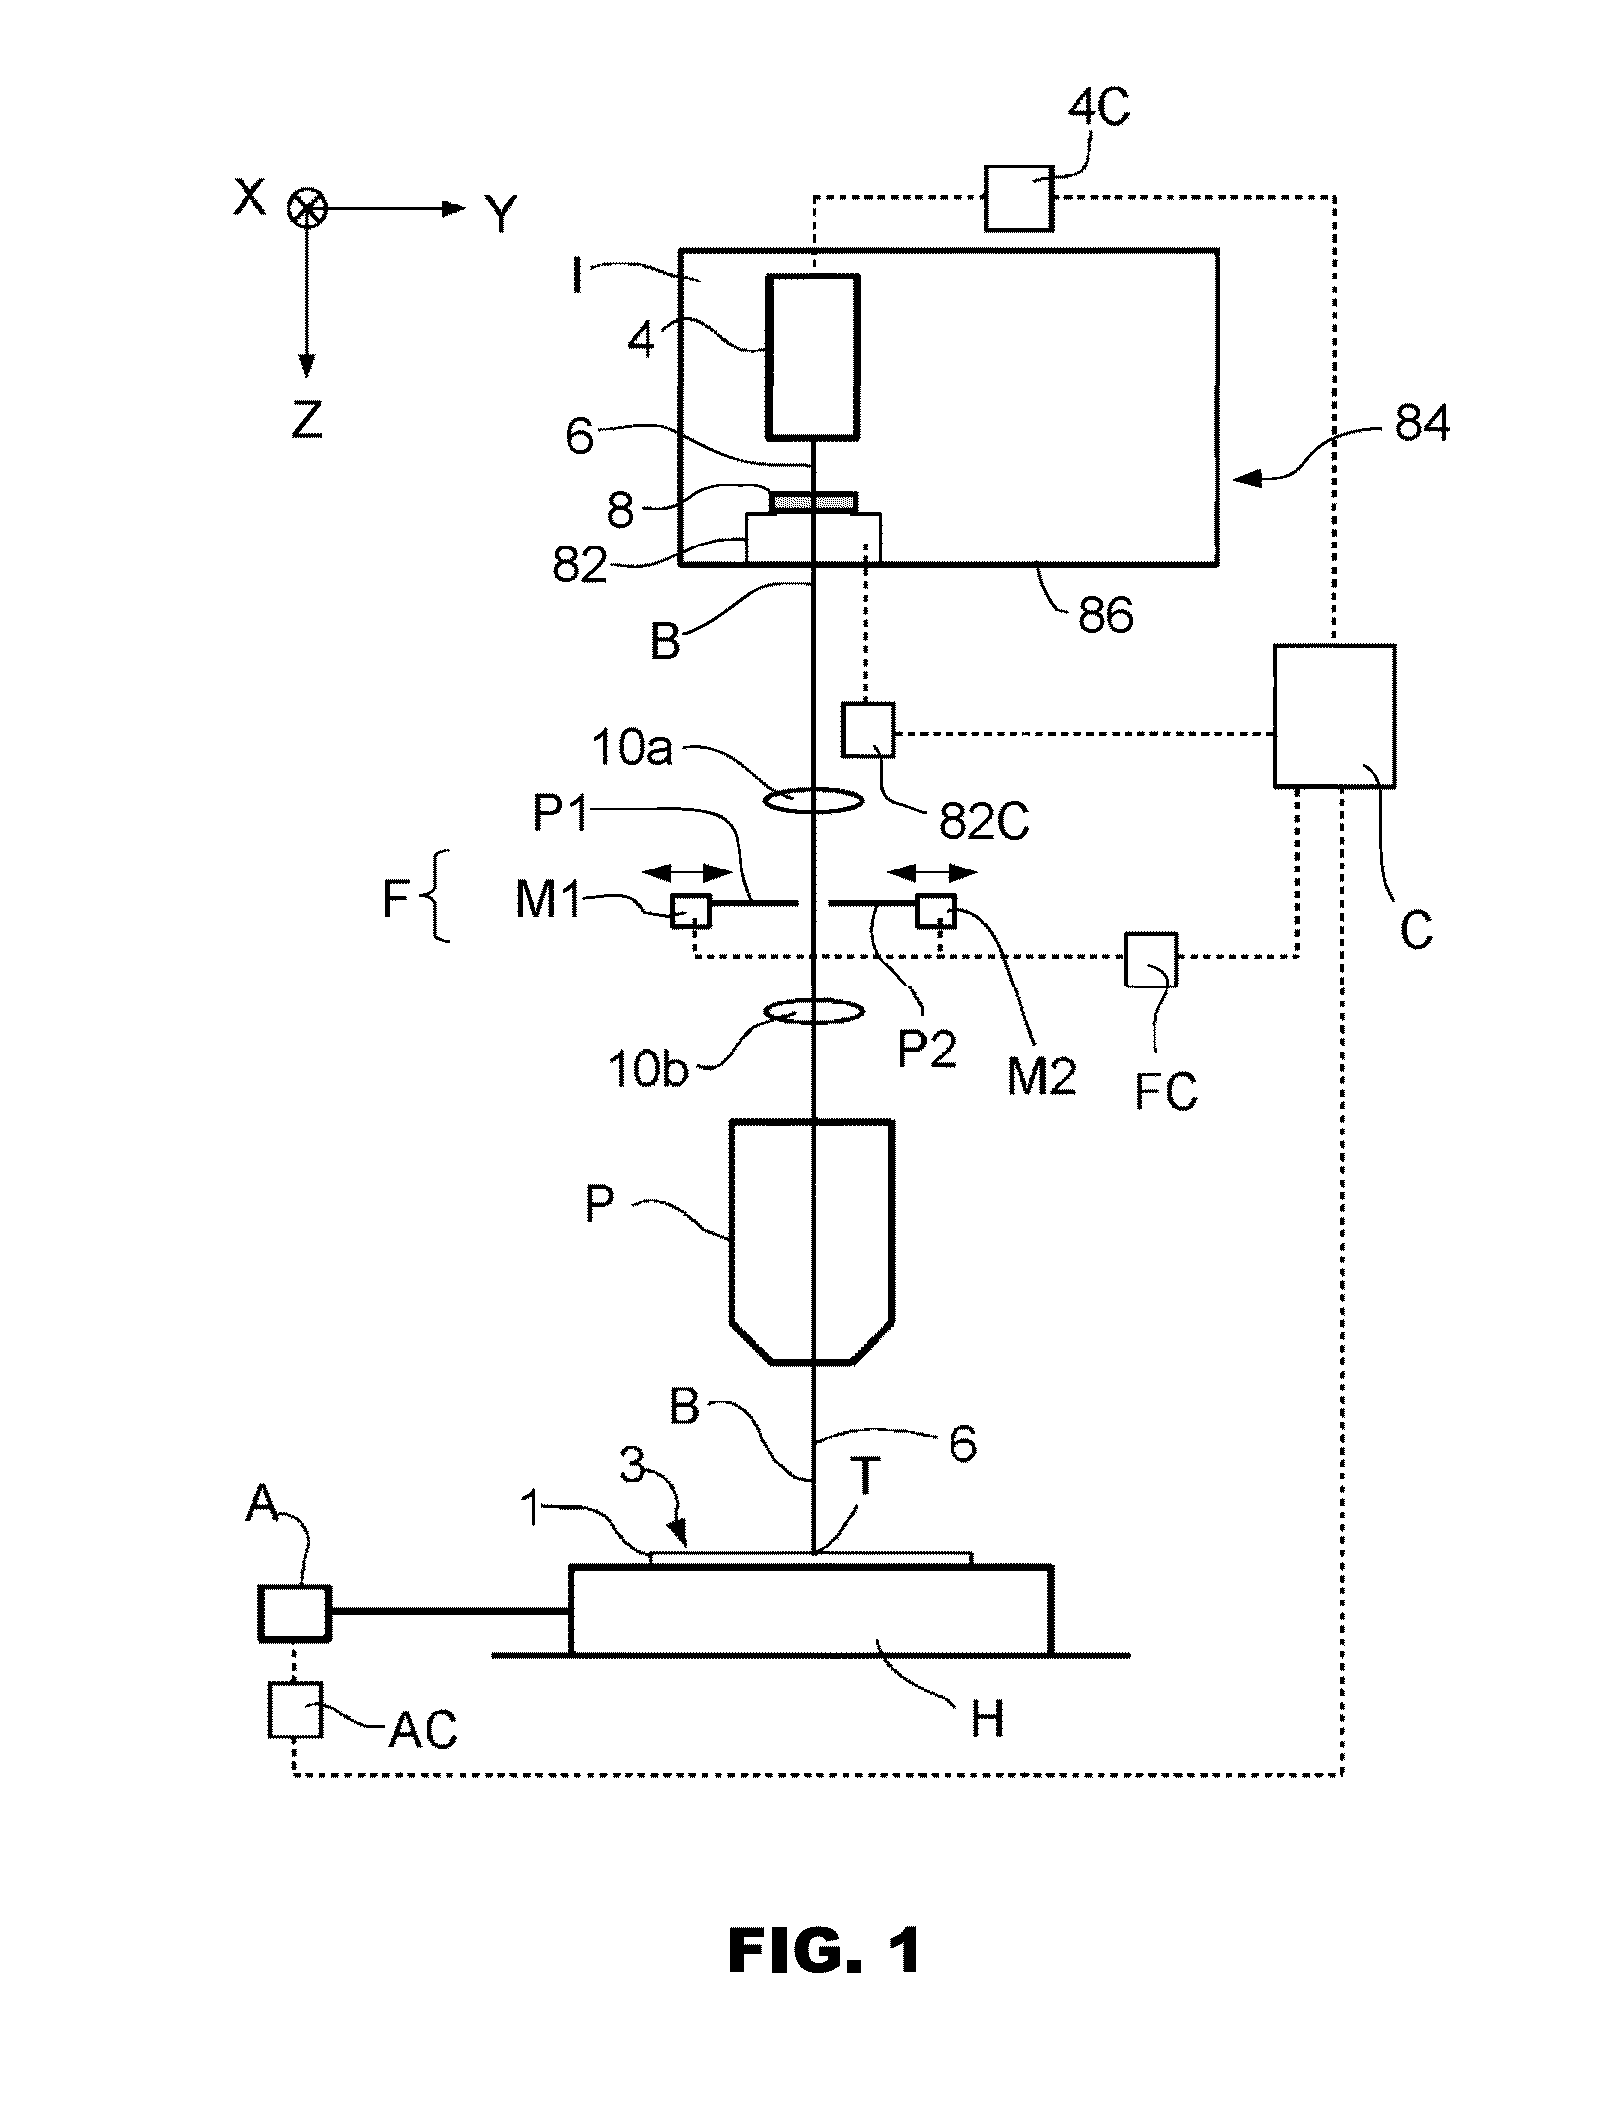 Method of dicing thin semiconductor substrates